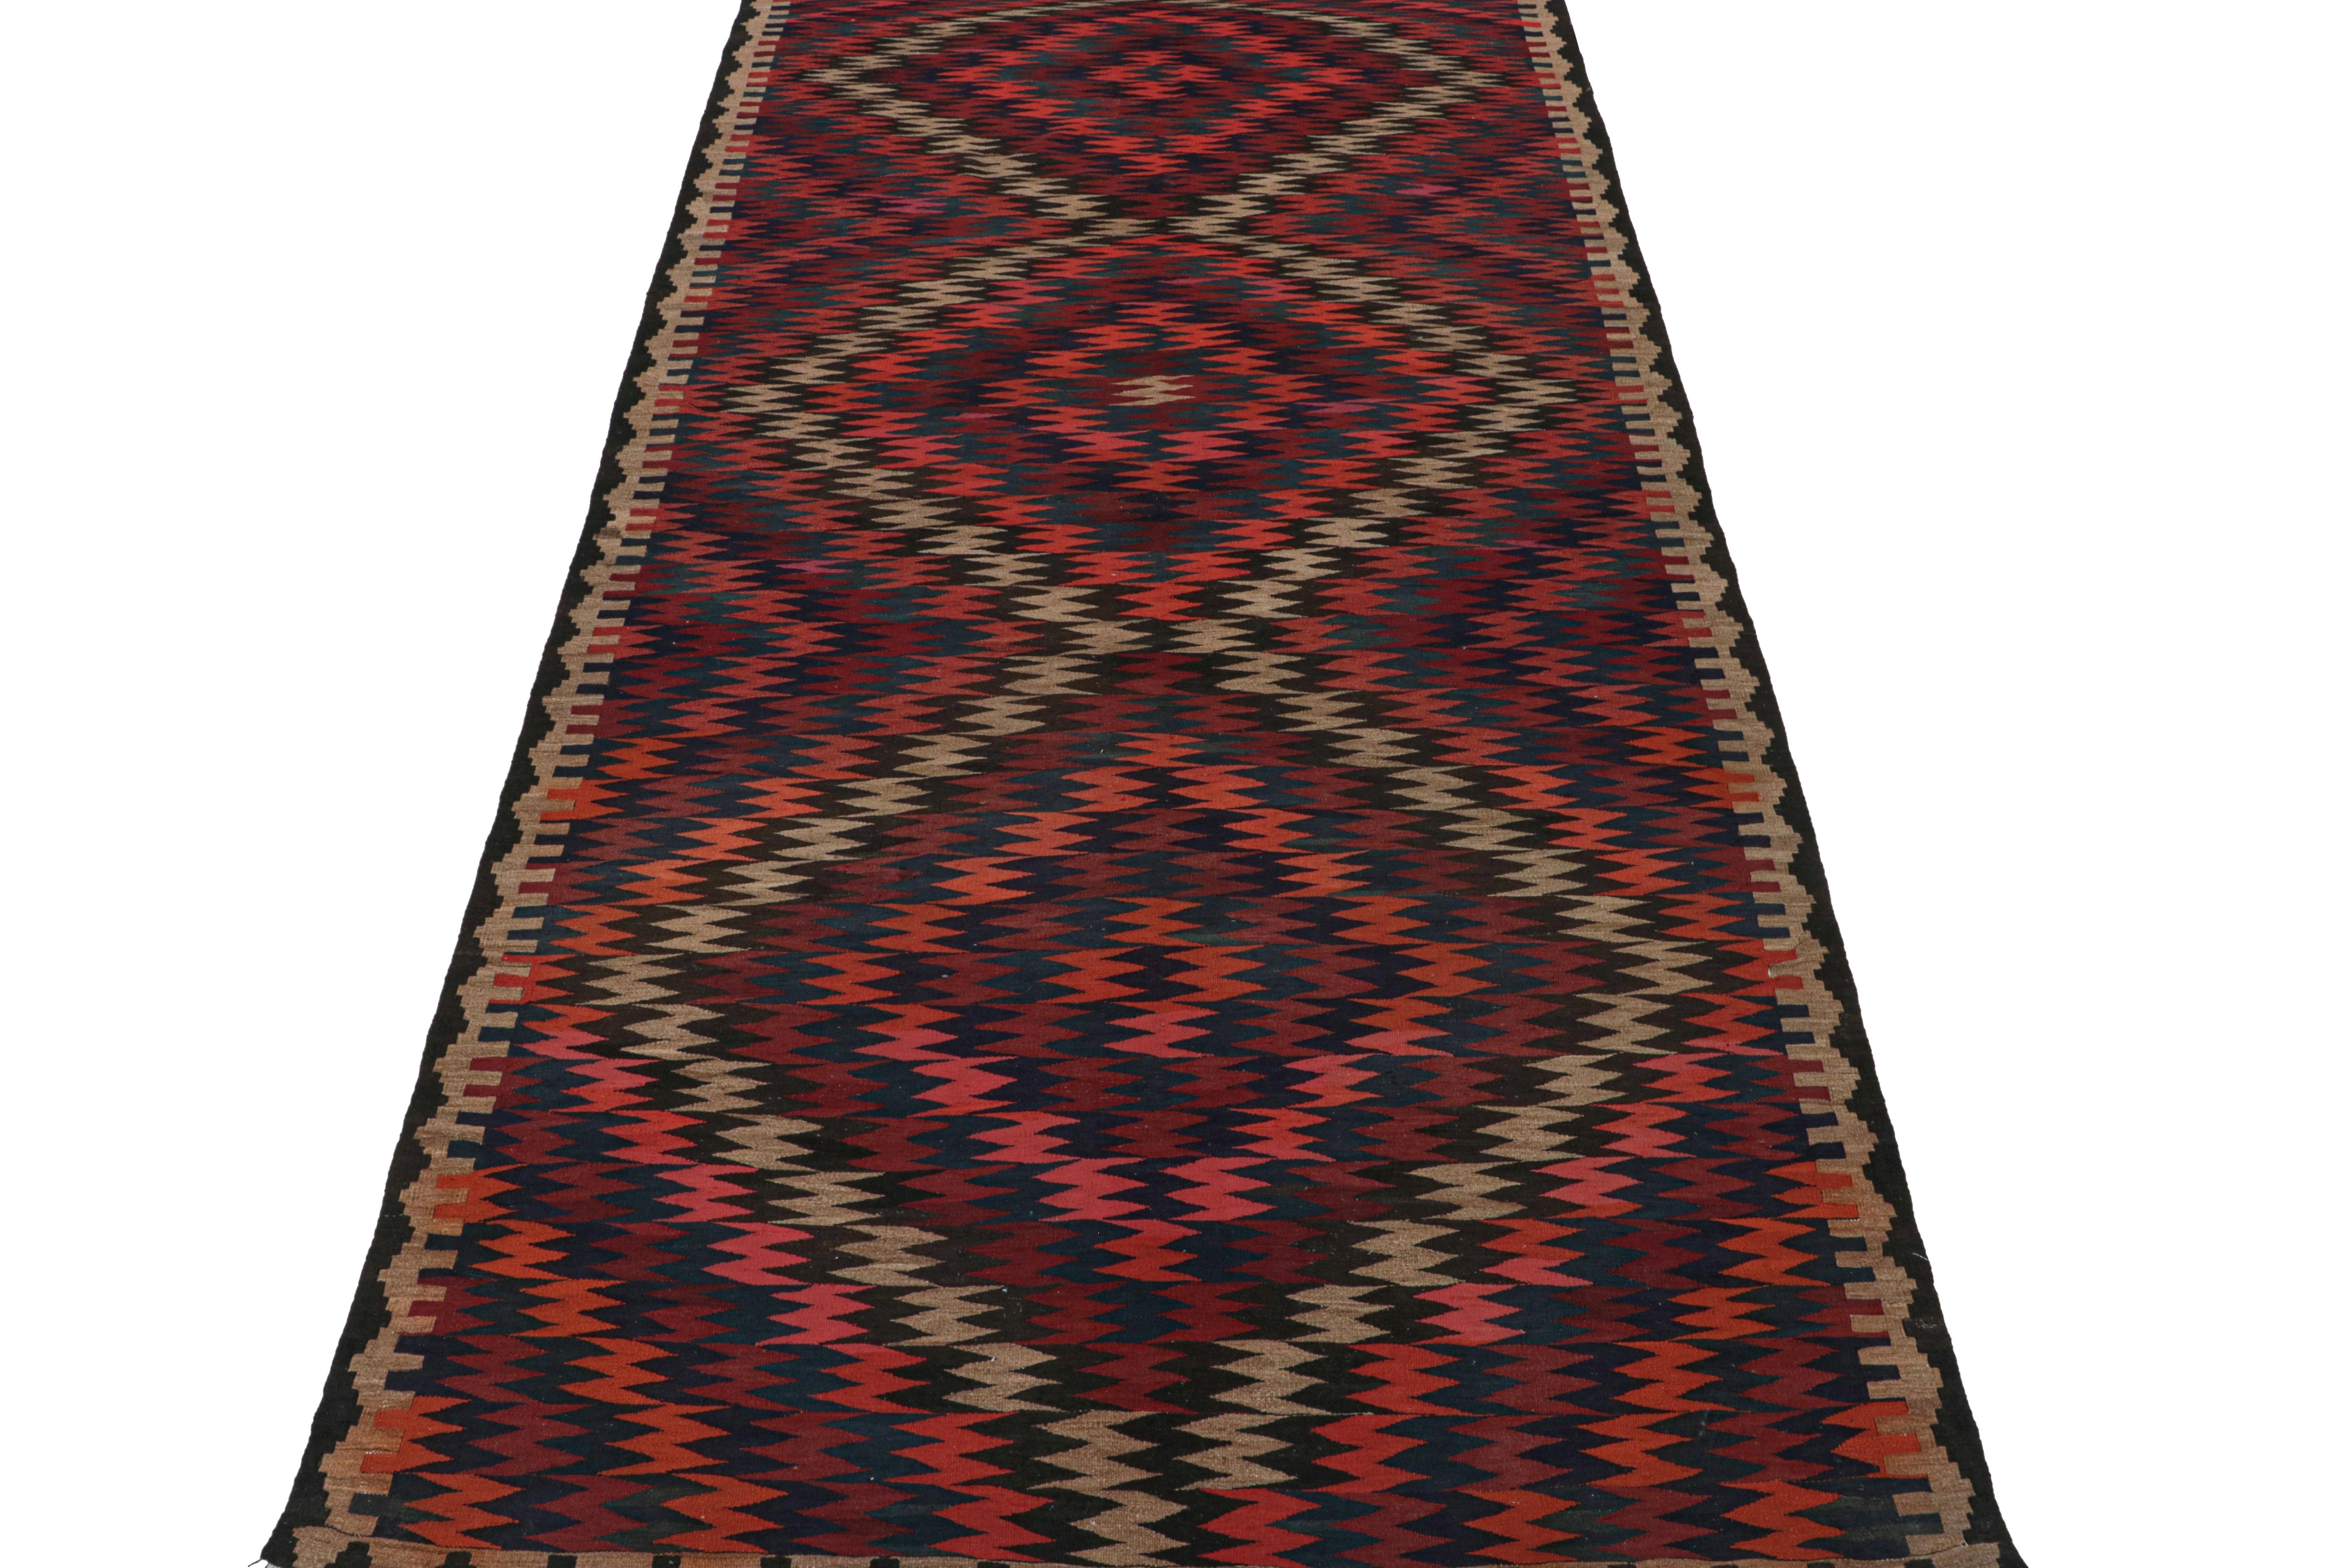 This vintage 7x14 Persian Kilim is believed to be a Bidjar rug of the titular Northwest Persian city. 

Handwoven in wool circa 1950-1960, this flat weave is a gallery runner—a versatile Size with vast applications today. Its design enjoys rich